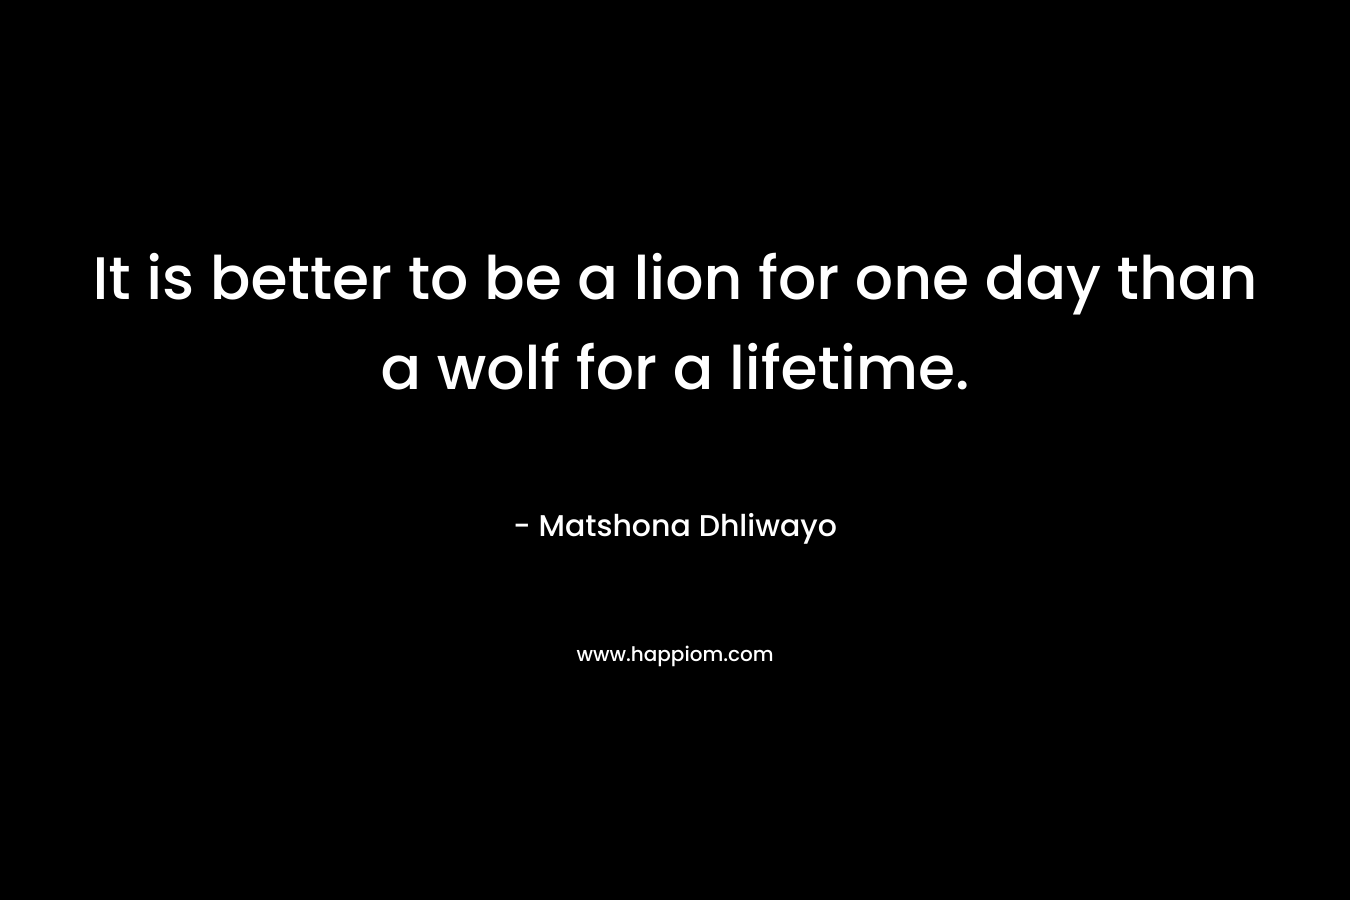 It is better to be a lion for one day than a wolf for a lifetime.